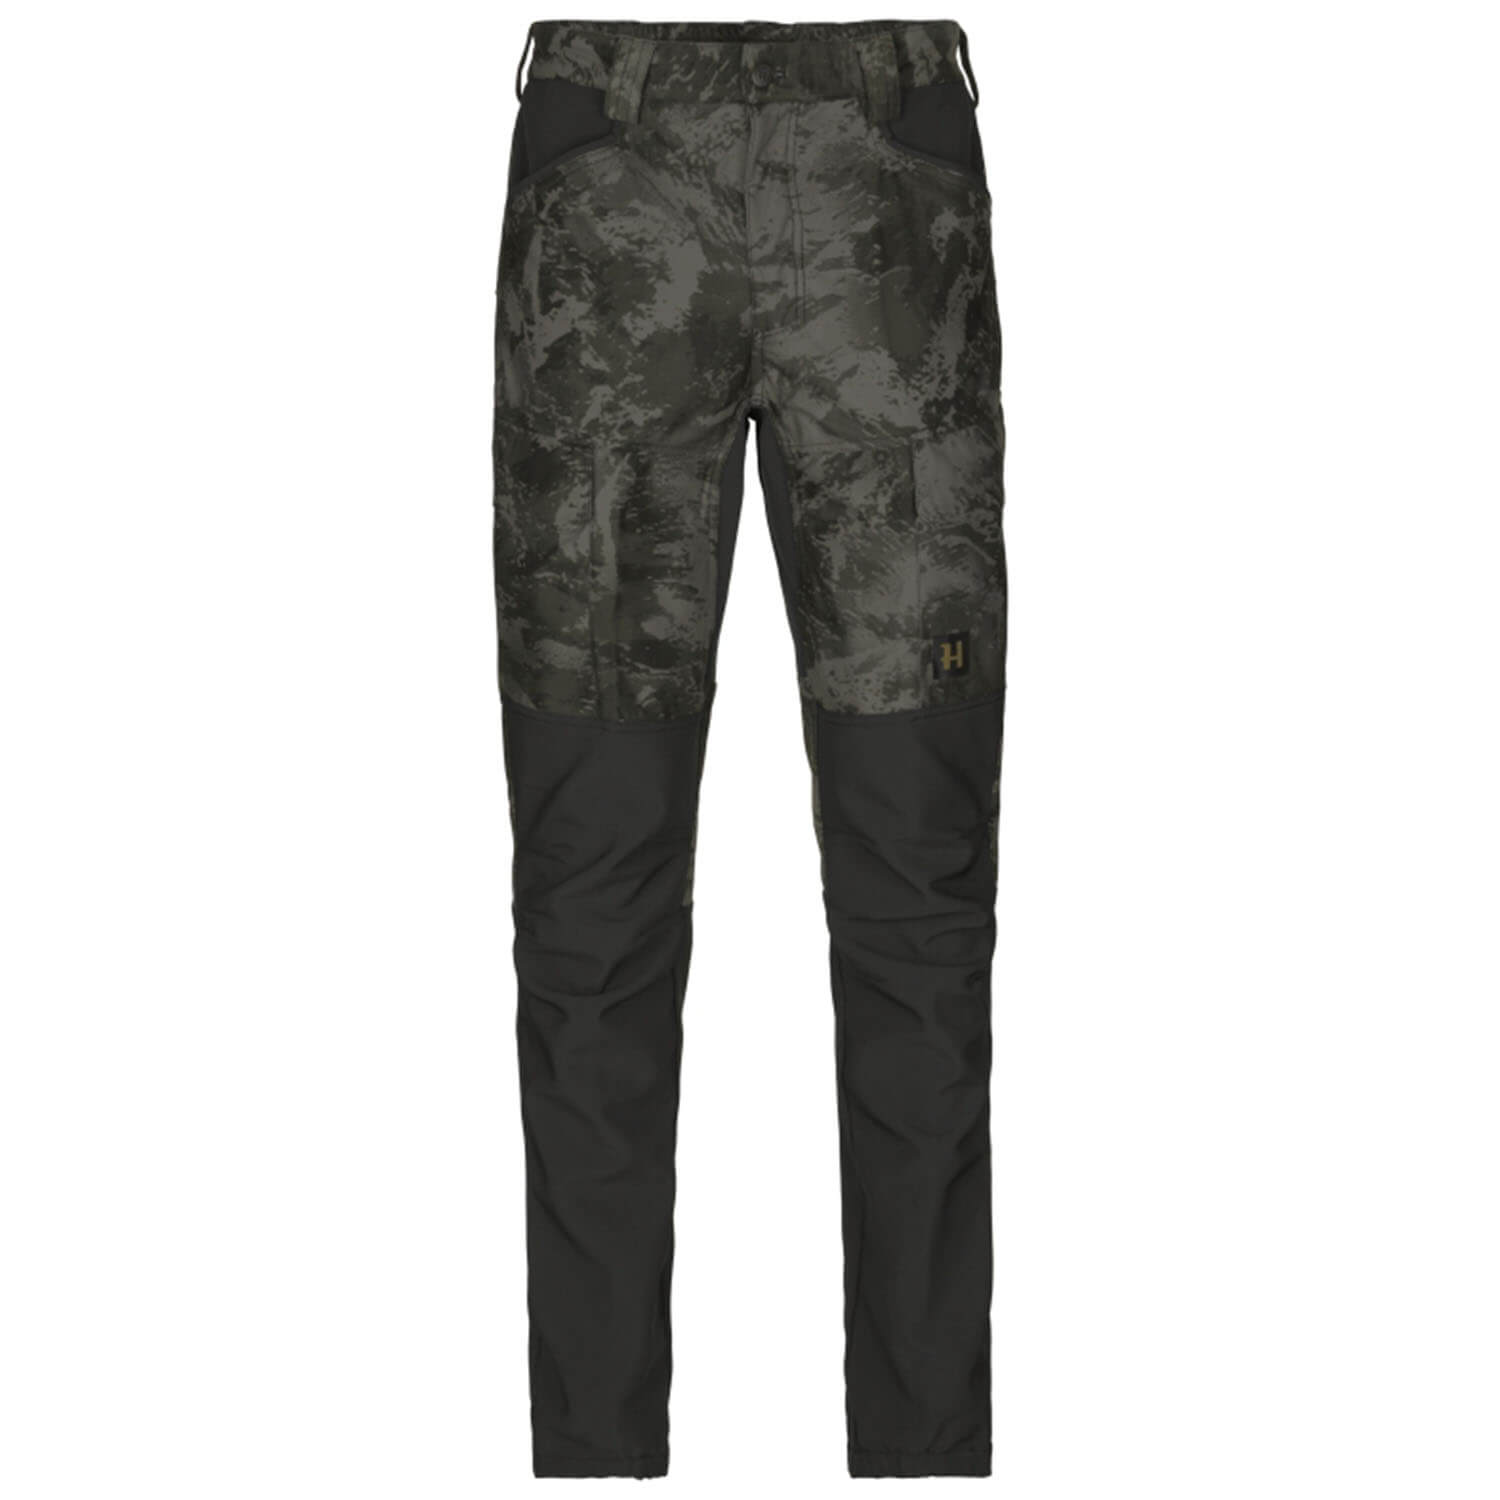 Härkila hunting trousers Noctyx Camo Silent - Men's Hunting Clothing